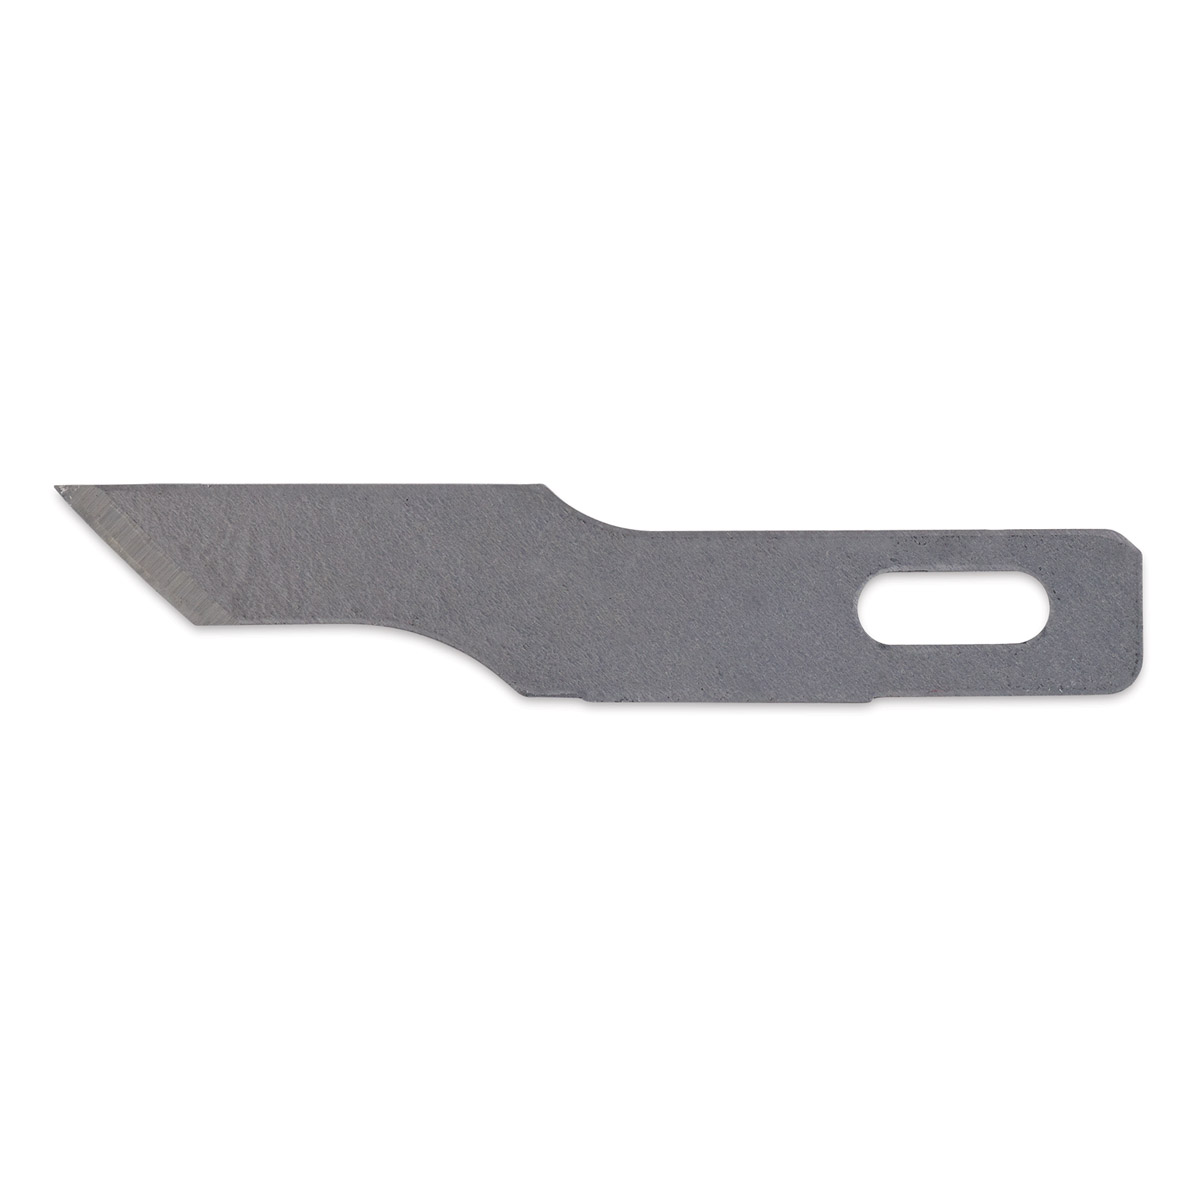 Double Ended Burnisher Tool (Silver) Excel Blades - Machinegun